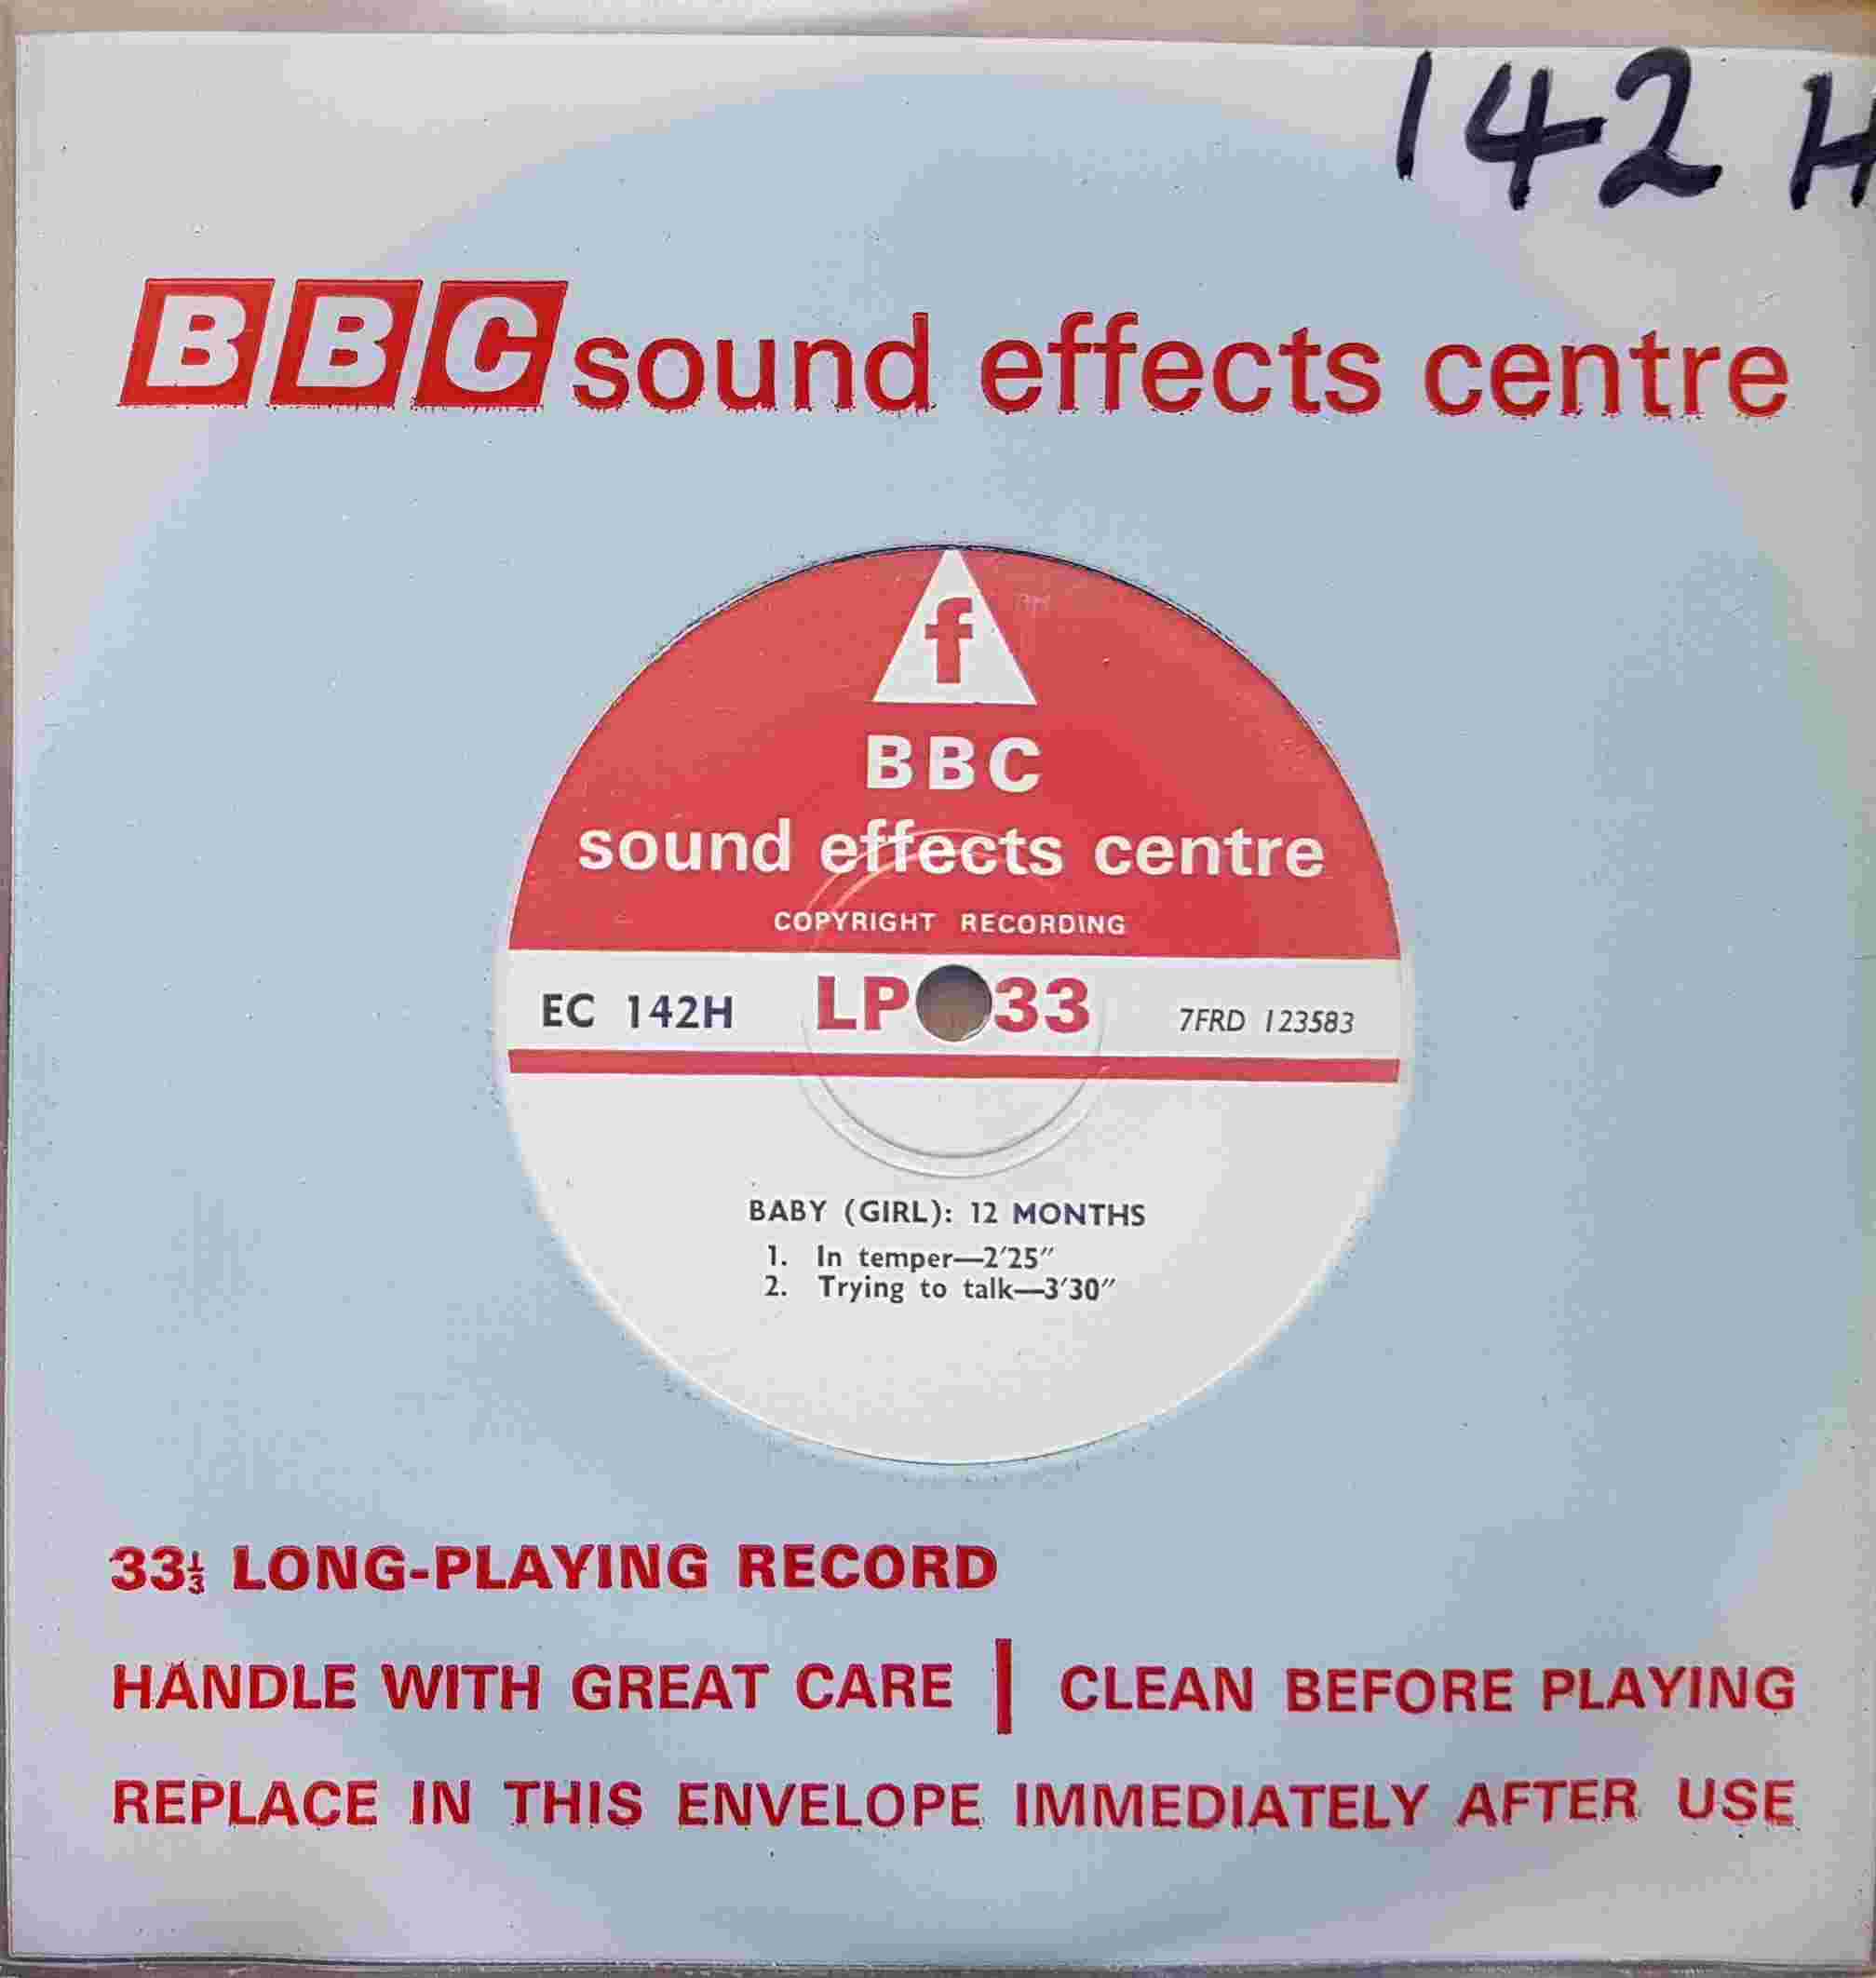 Picture of EC 142H Baby (Girl) 12 months by artist Not registered from the BBC singles - Records and Tapes library